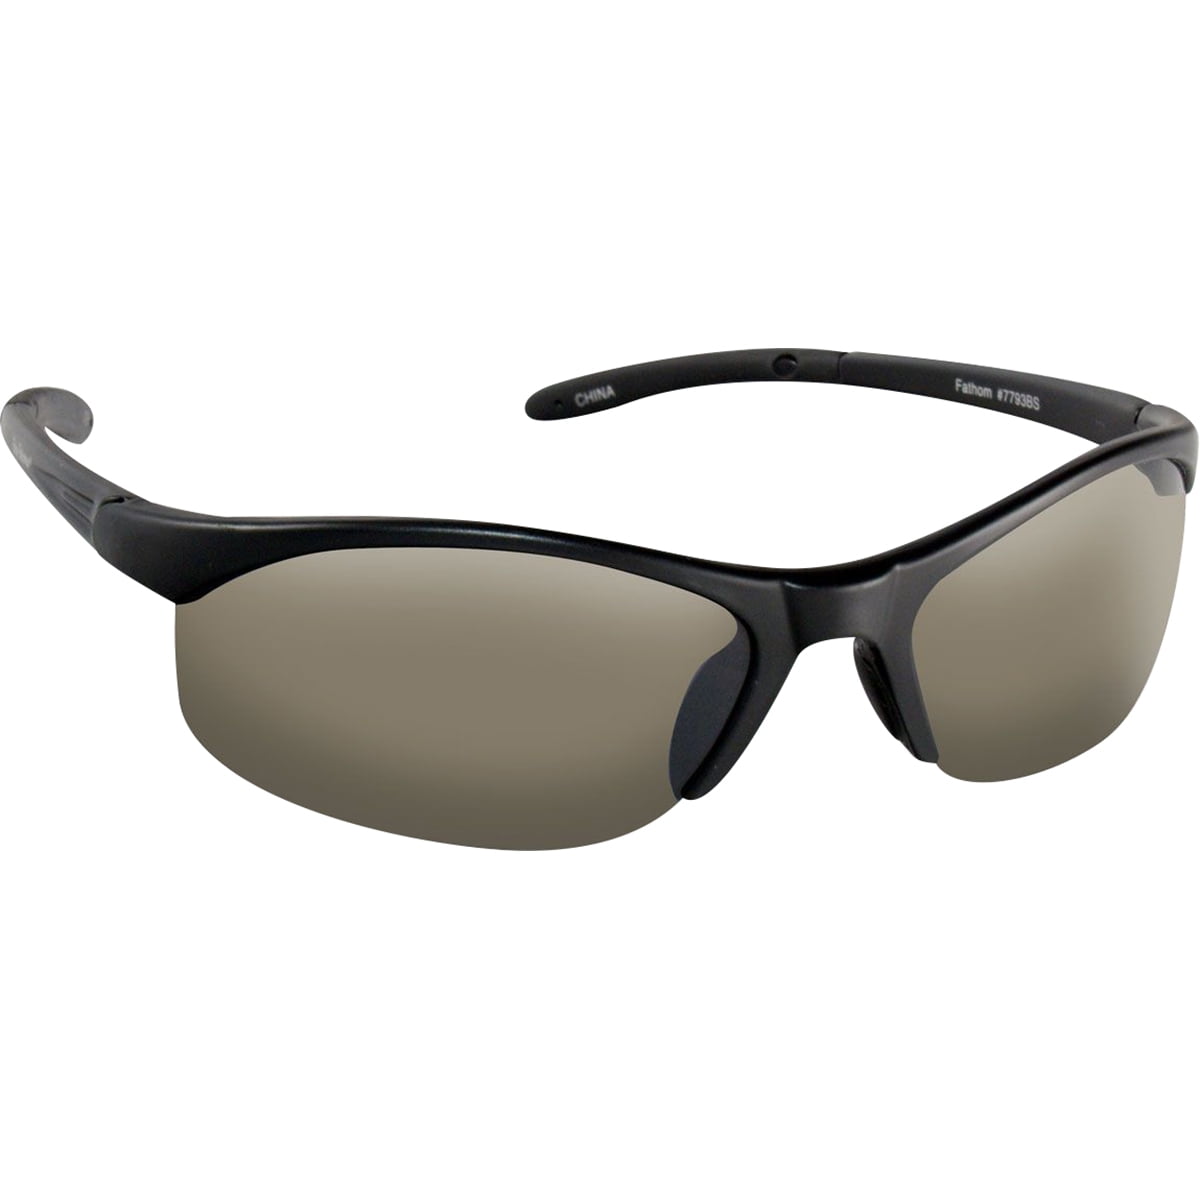 Flying Fisherman Cabo Sunglasses for sale online 